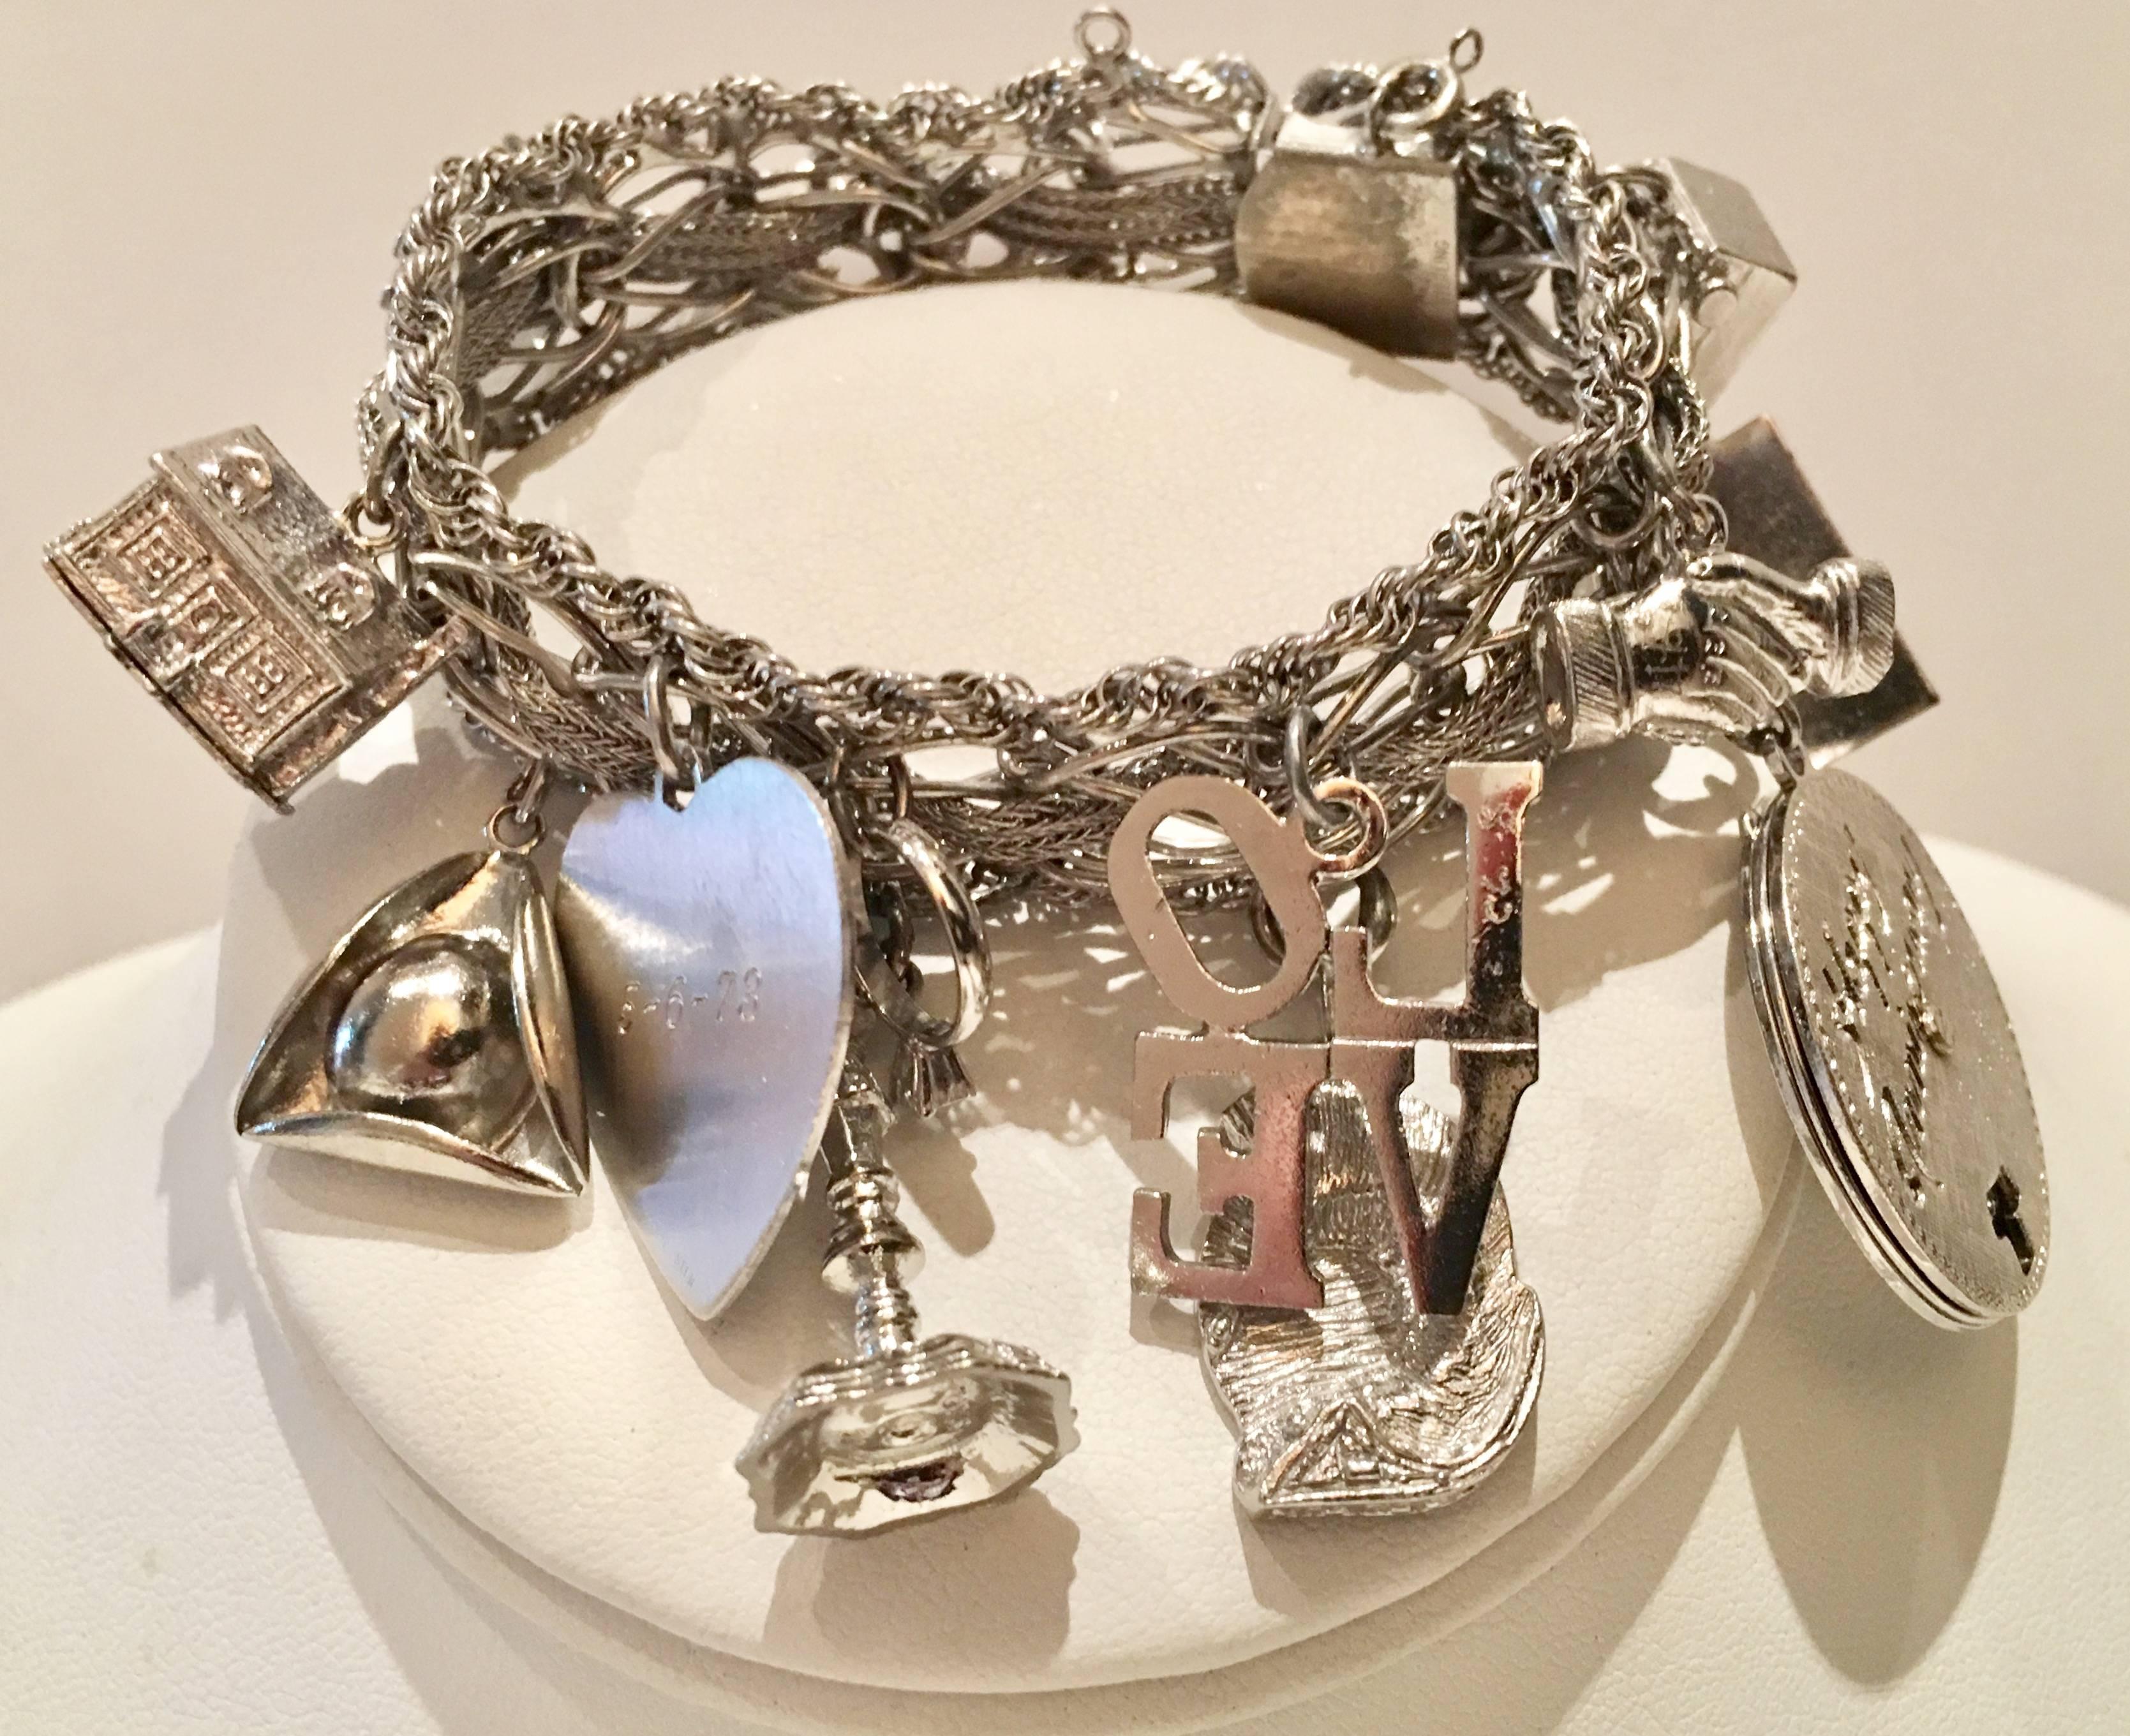 Incredible example of the iconic and popular 1960s collectors charm bracelet. This beauty is one of the most substantial and total sterling silver weighs is 92 grams. Featuring 13 individual charms some of the charms are dated, starting with the mid